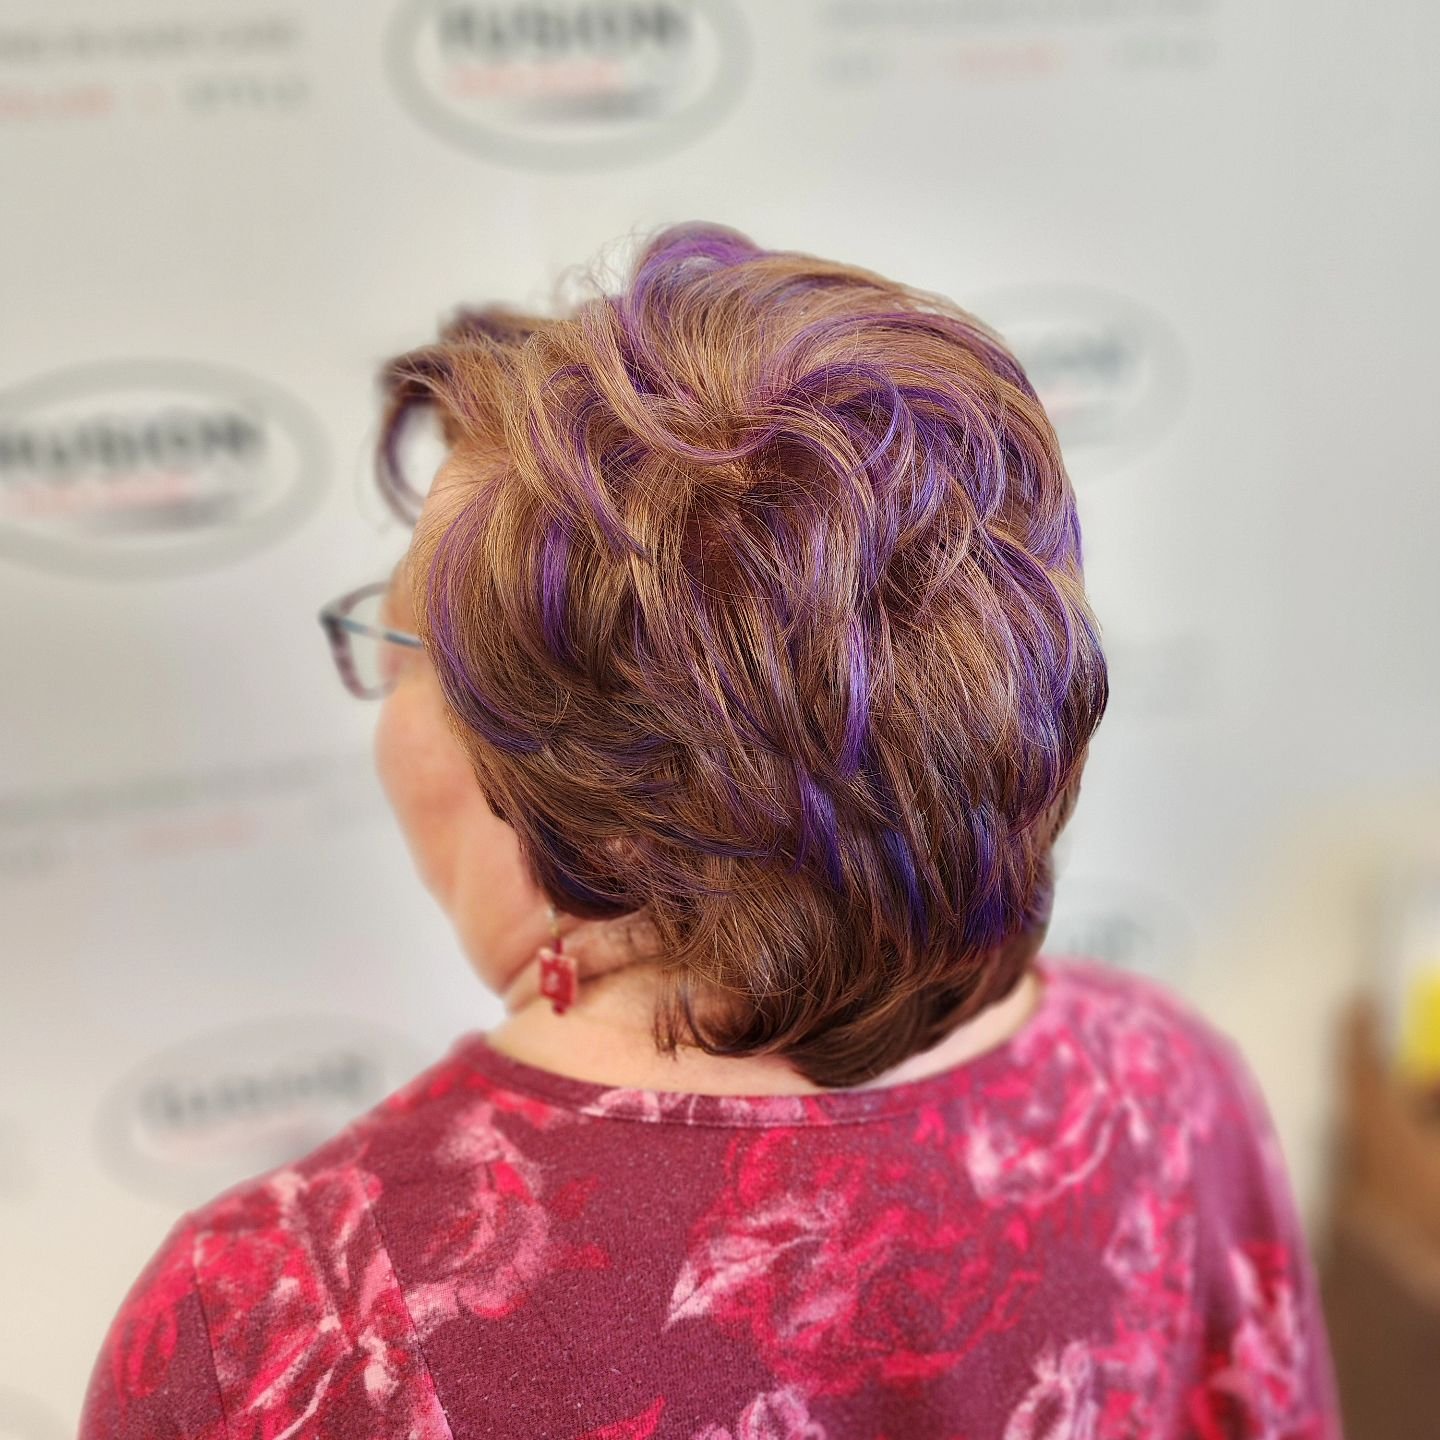 Rocking the short brown hair with pops of violet!
📲 914-302-6114 The fusion team is here for all your color &amp; styling needs 
 💇&zwj;♀️
💜
#dimensionalcolor #shorthairstyle ##shorthaircolor #ShortHairDontCare #violethighlight #HairGoals #TrendyL